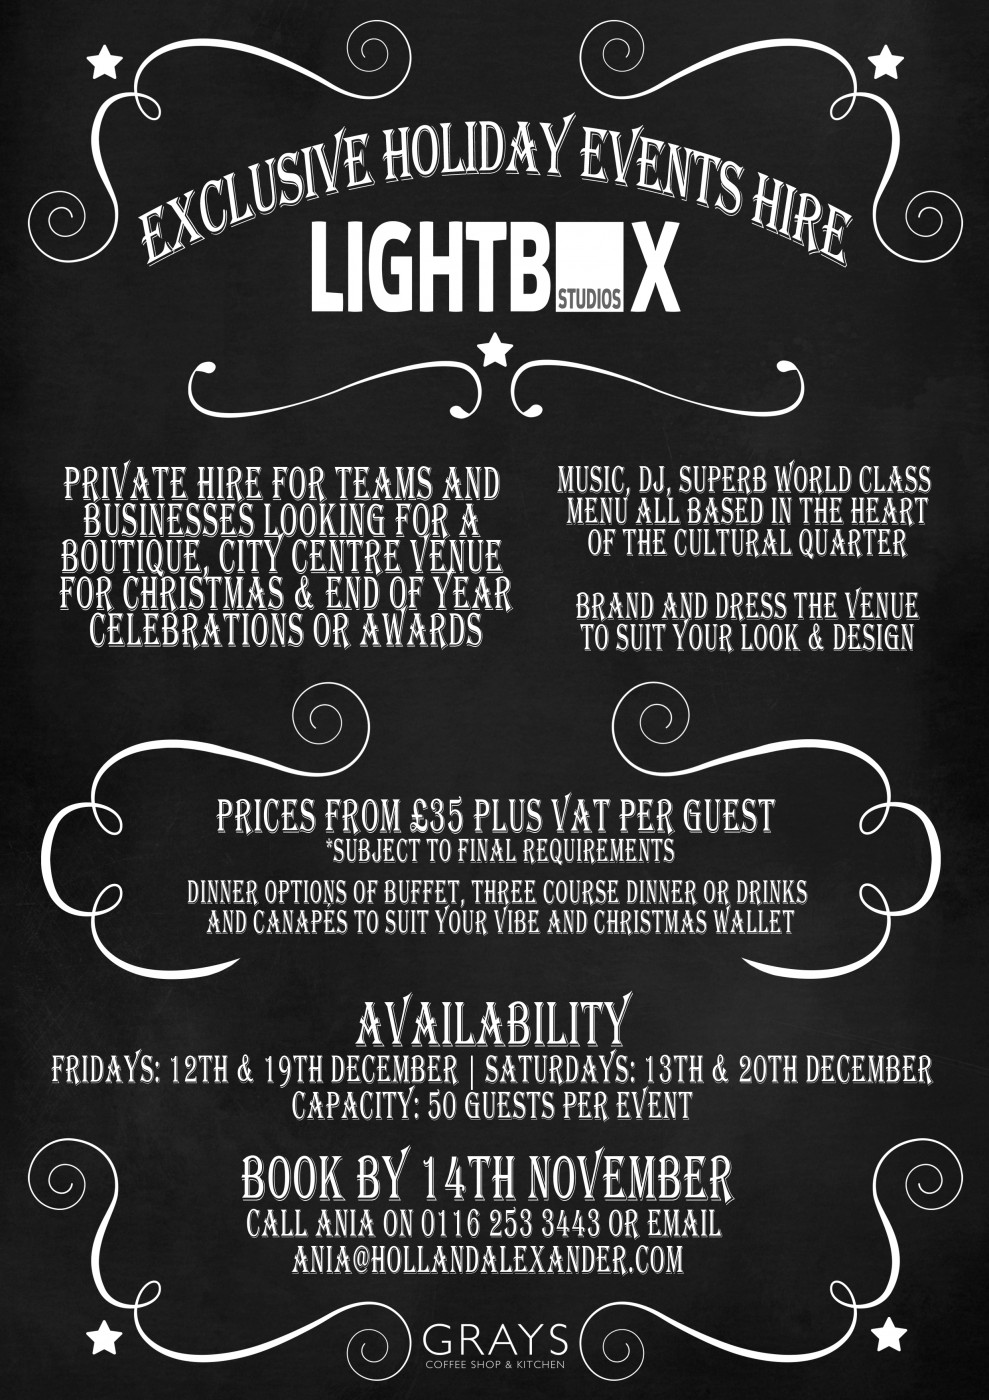 Lightbox Studios Exclusive Holiday Events Hire JPEG